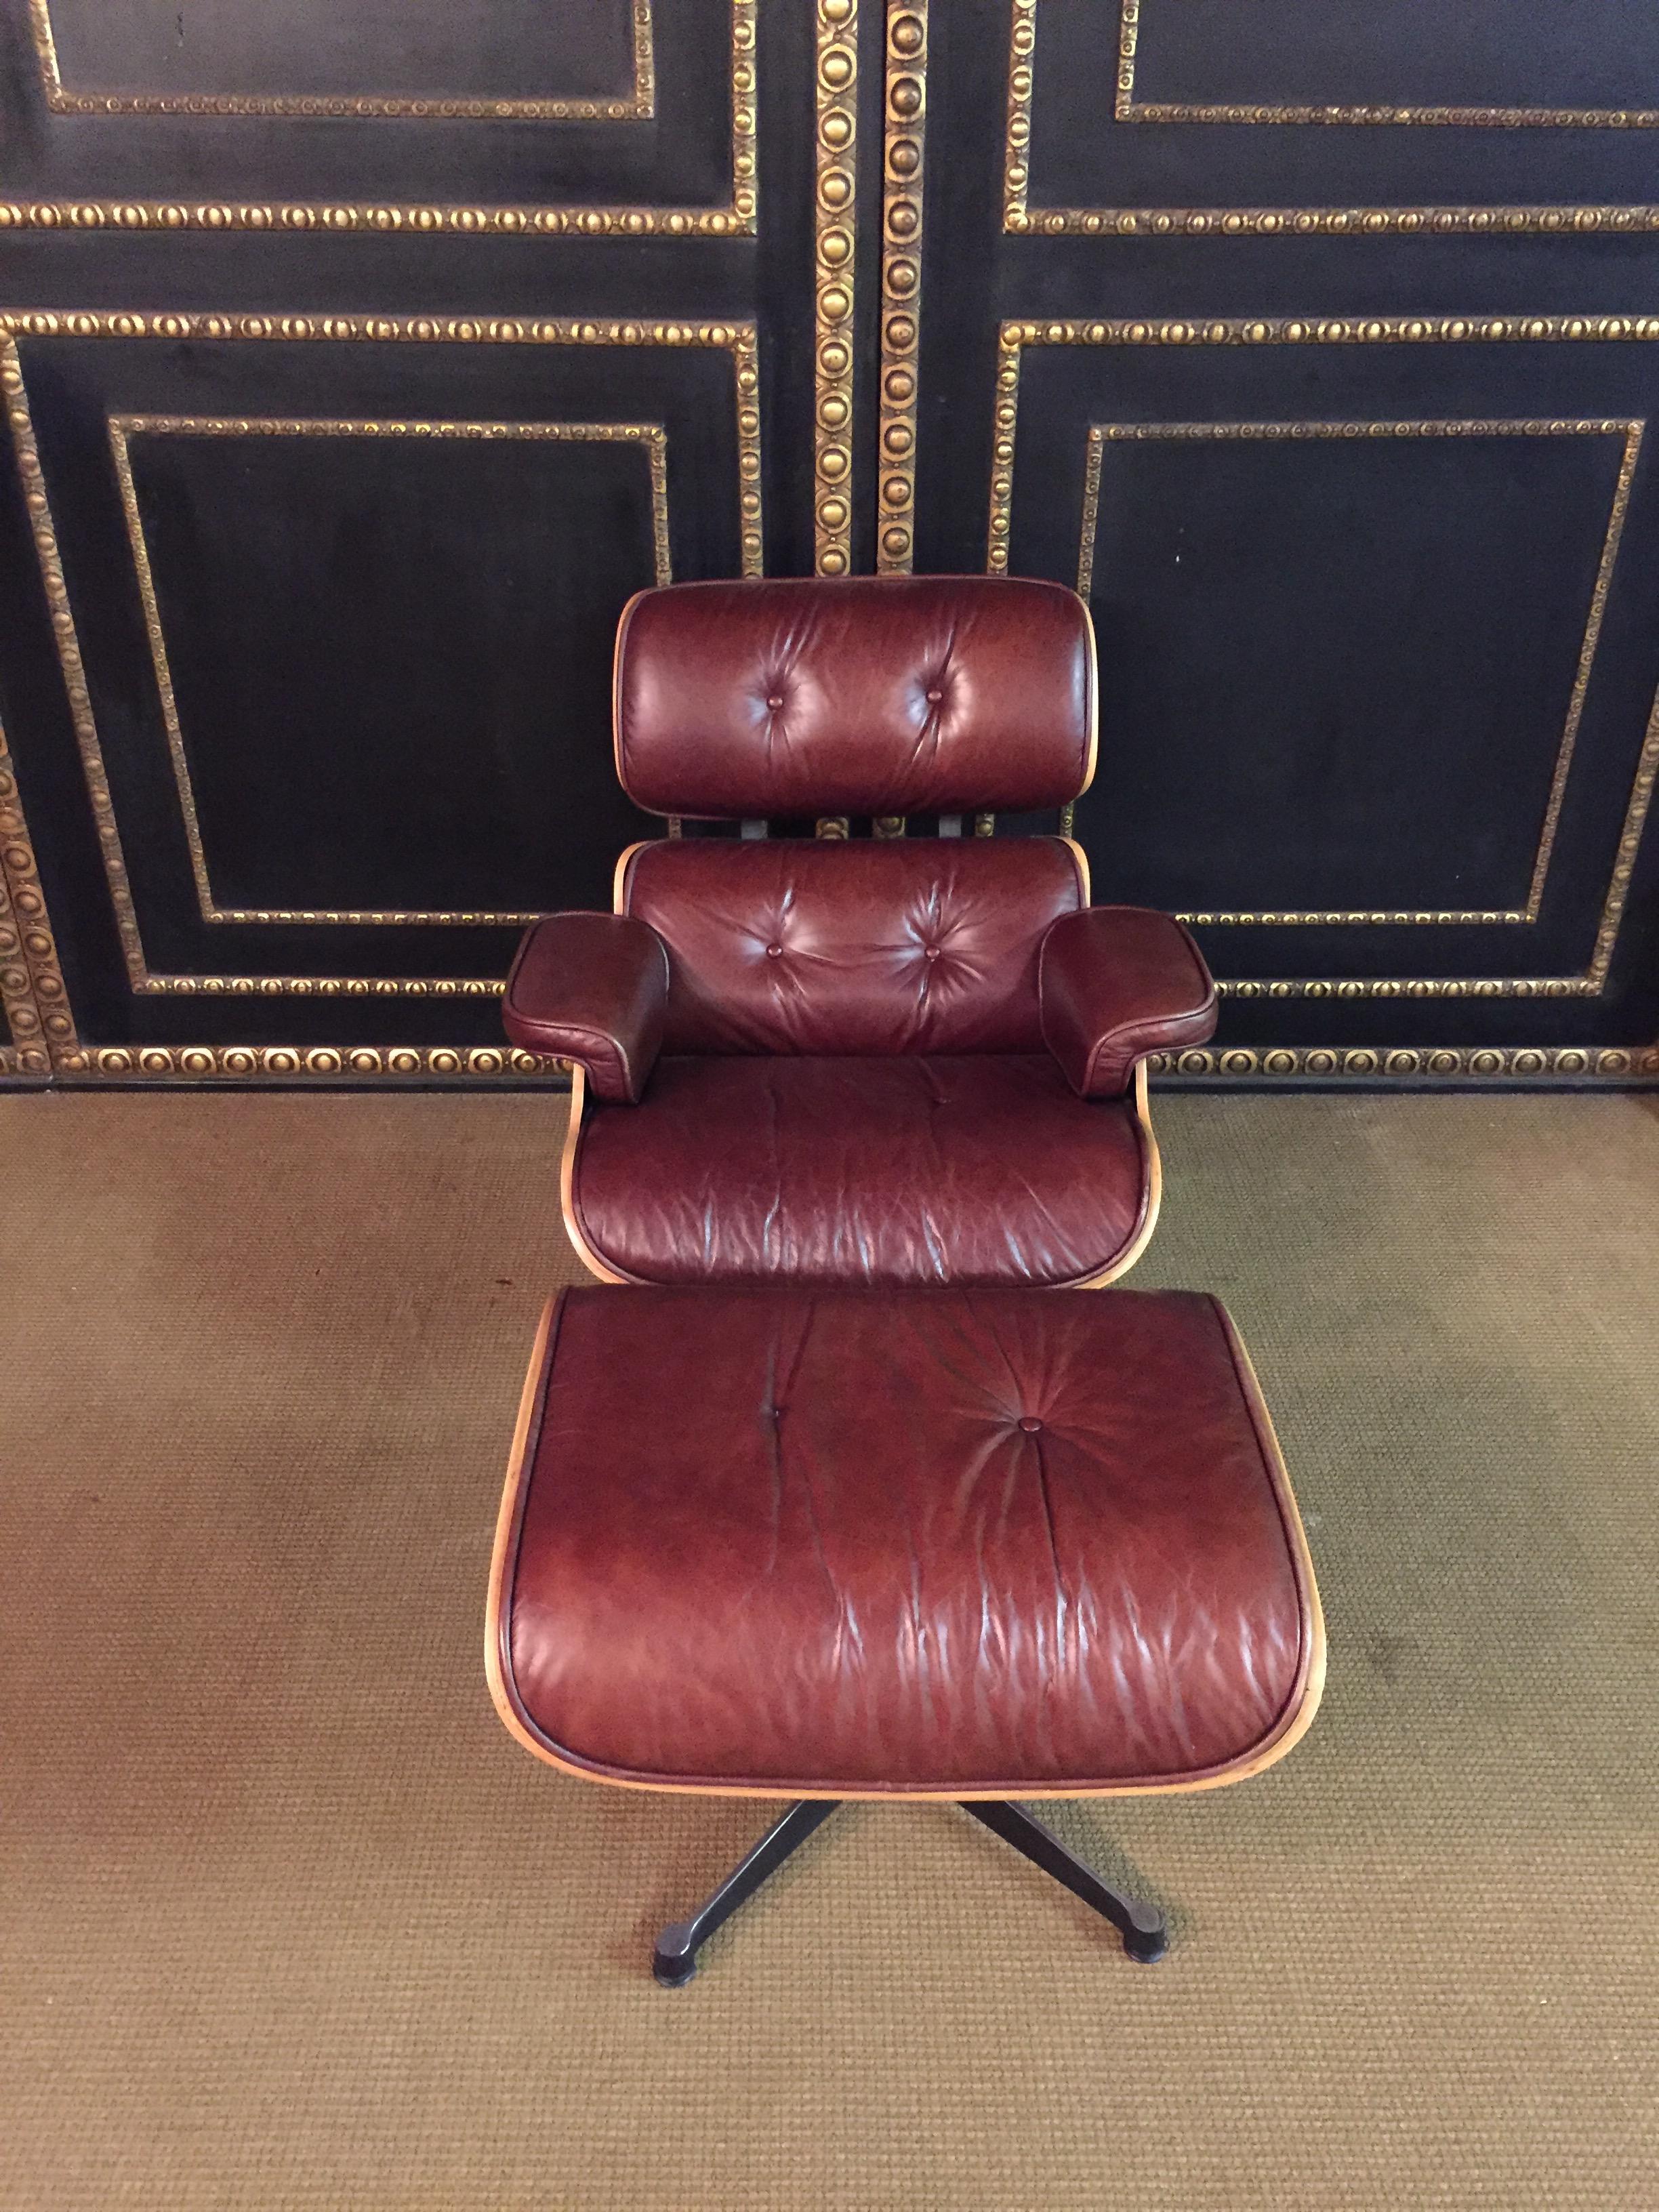 Charles Eames Lounge Chair Style (Replica) fine leather. Light rosewood with ottoman.
finest Italian quality.

Like the original, all parts are removable and the leather is with a decorative closure to open.